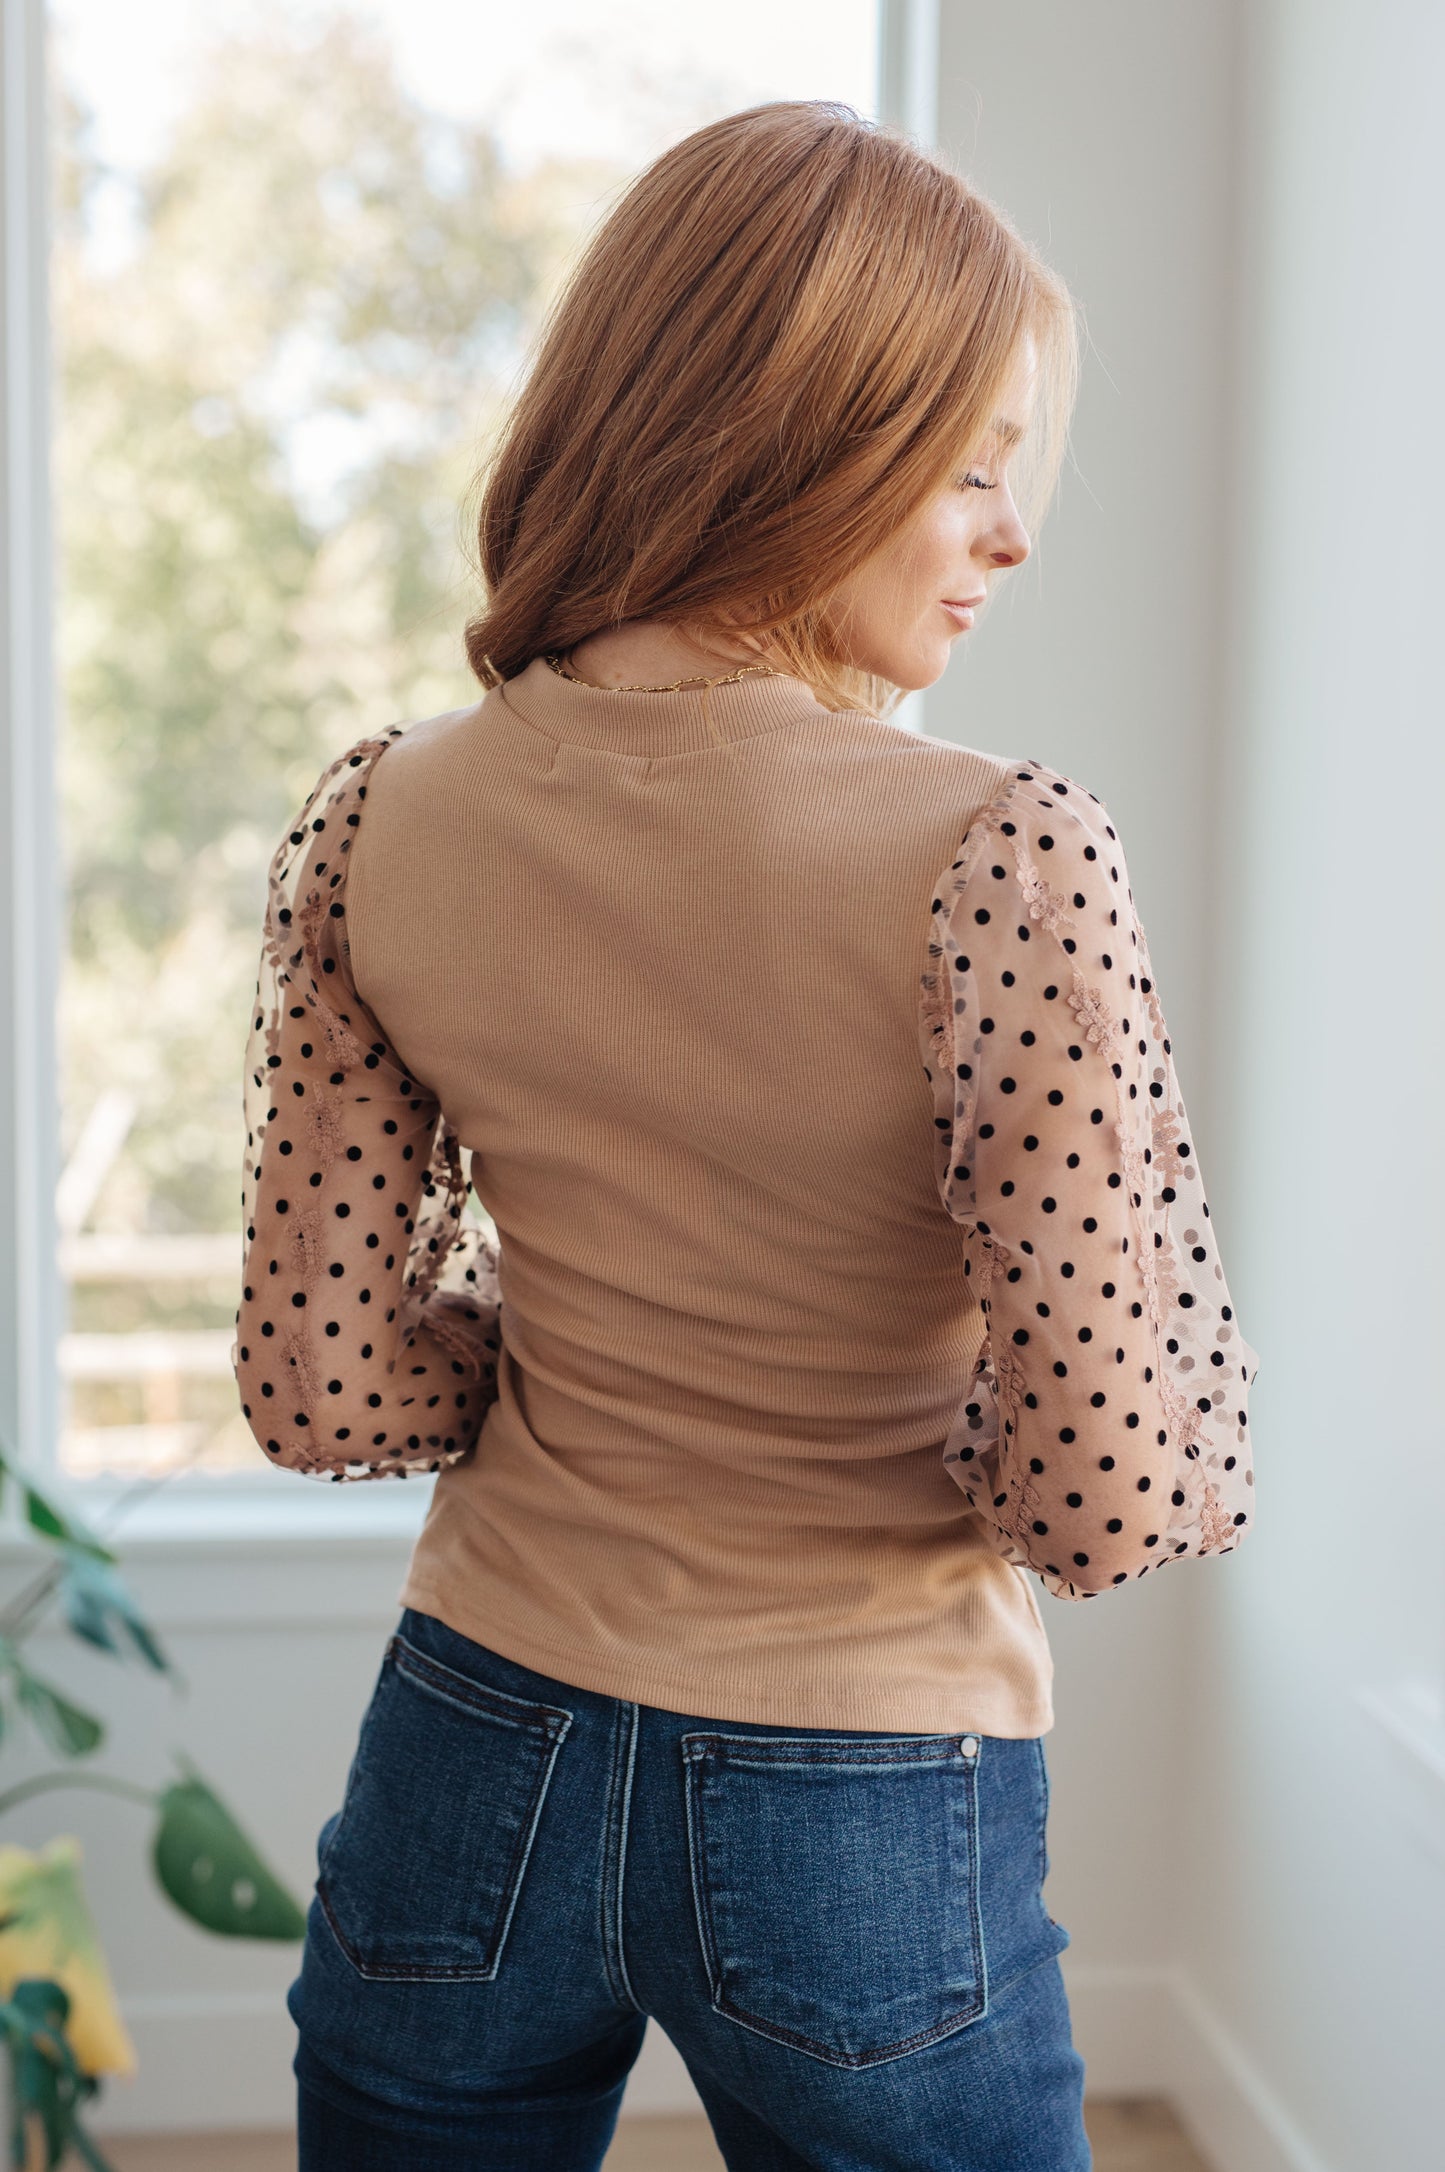 Be fashion-forward in our exclusive Dots on My Sleeves Blouse! This slim-fit top features sheer sleeves embellished with velvet polka dots and an embroidered floral pattern. The round neckline gives the perfect finishing touch to this unique style. Stay chic and look fabulous in this essential blouse! S - 3X